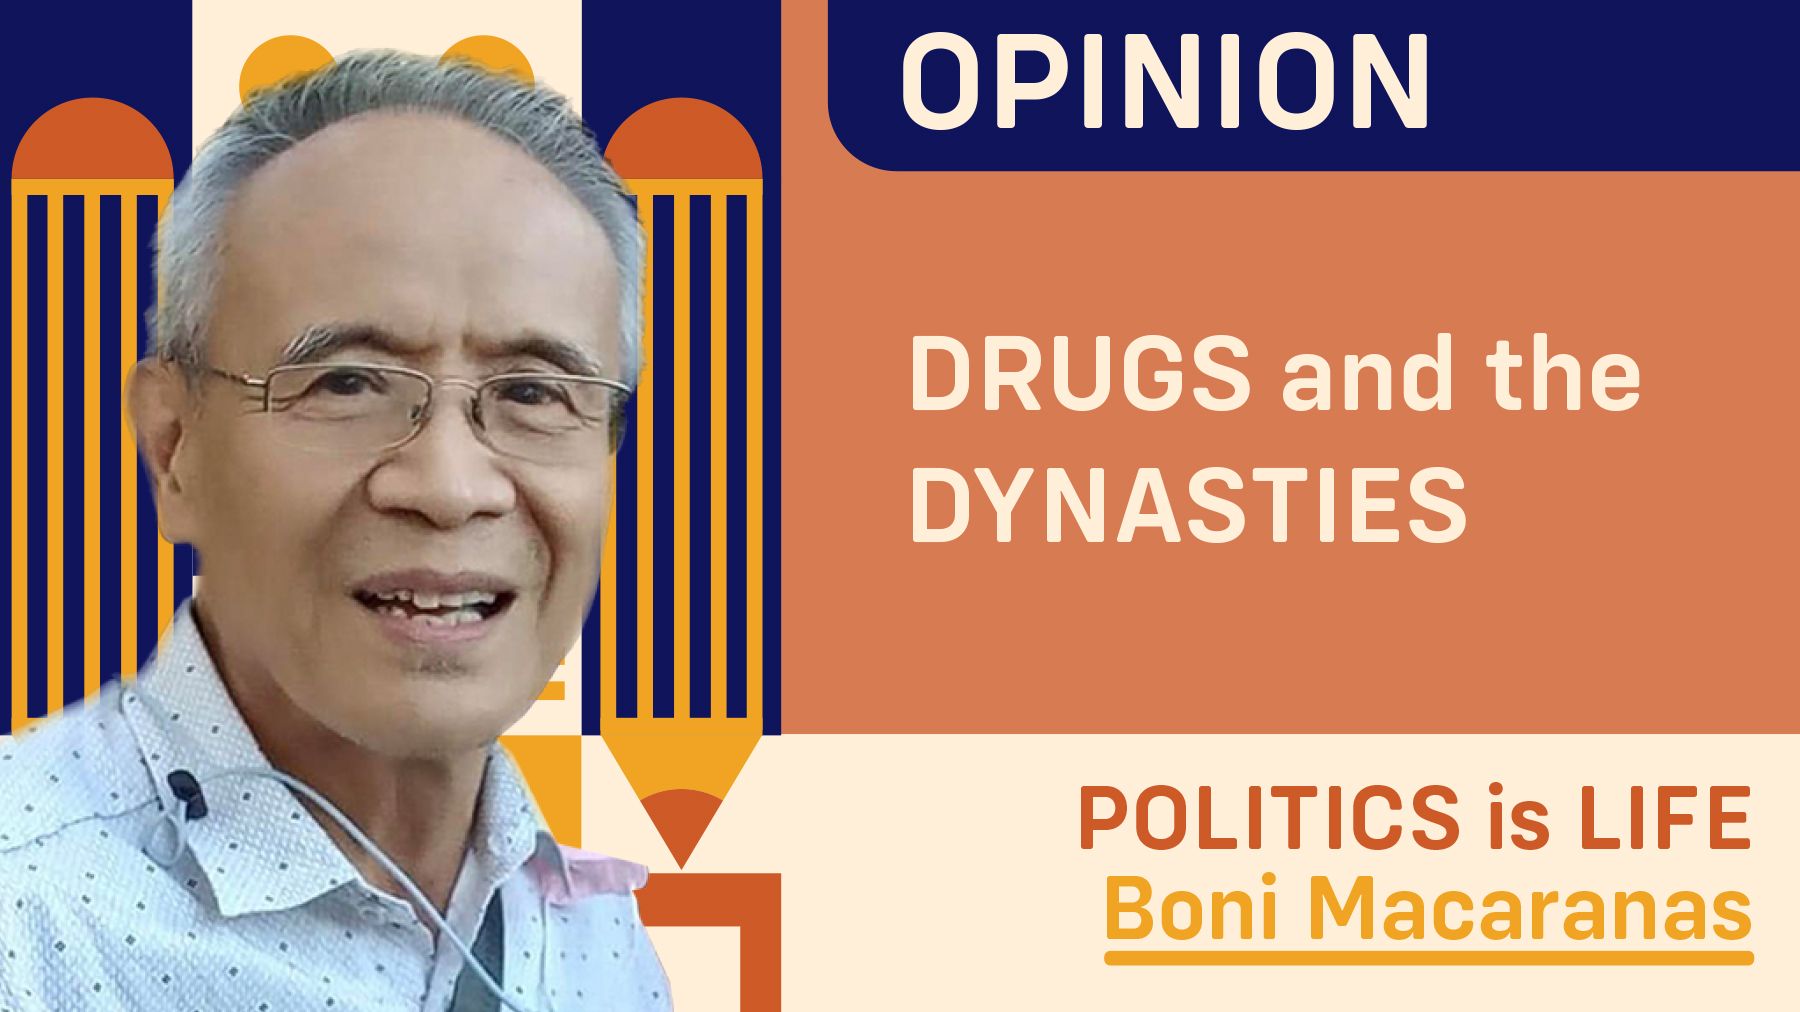 DRUGS and the DYNASTIES